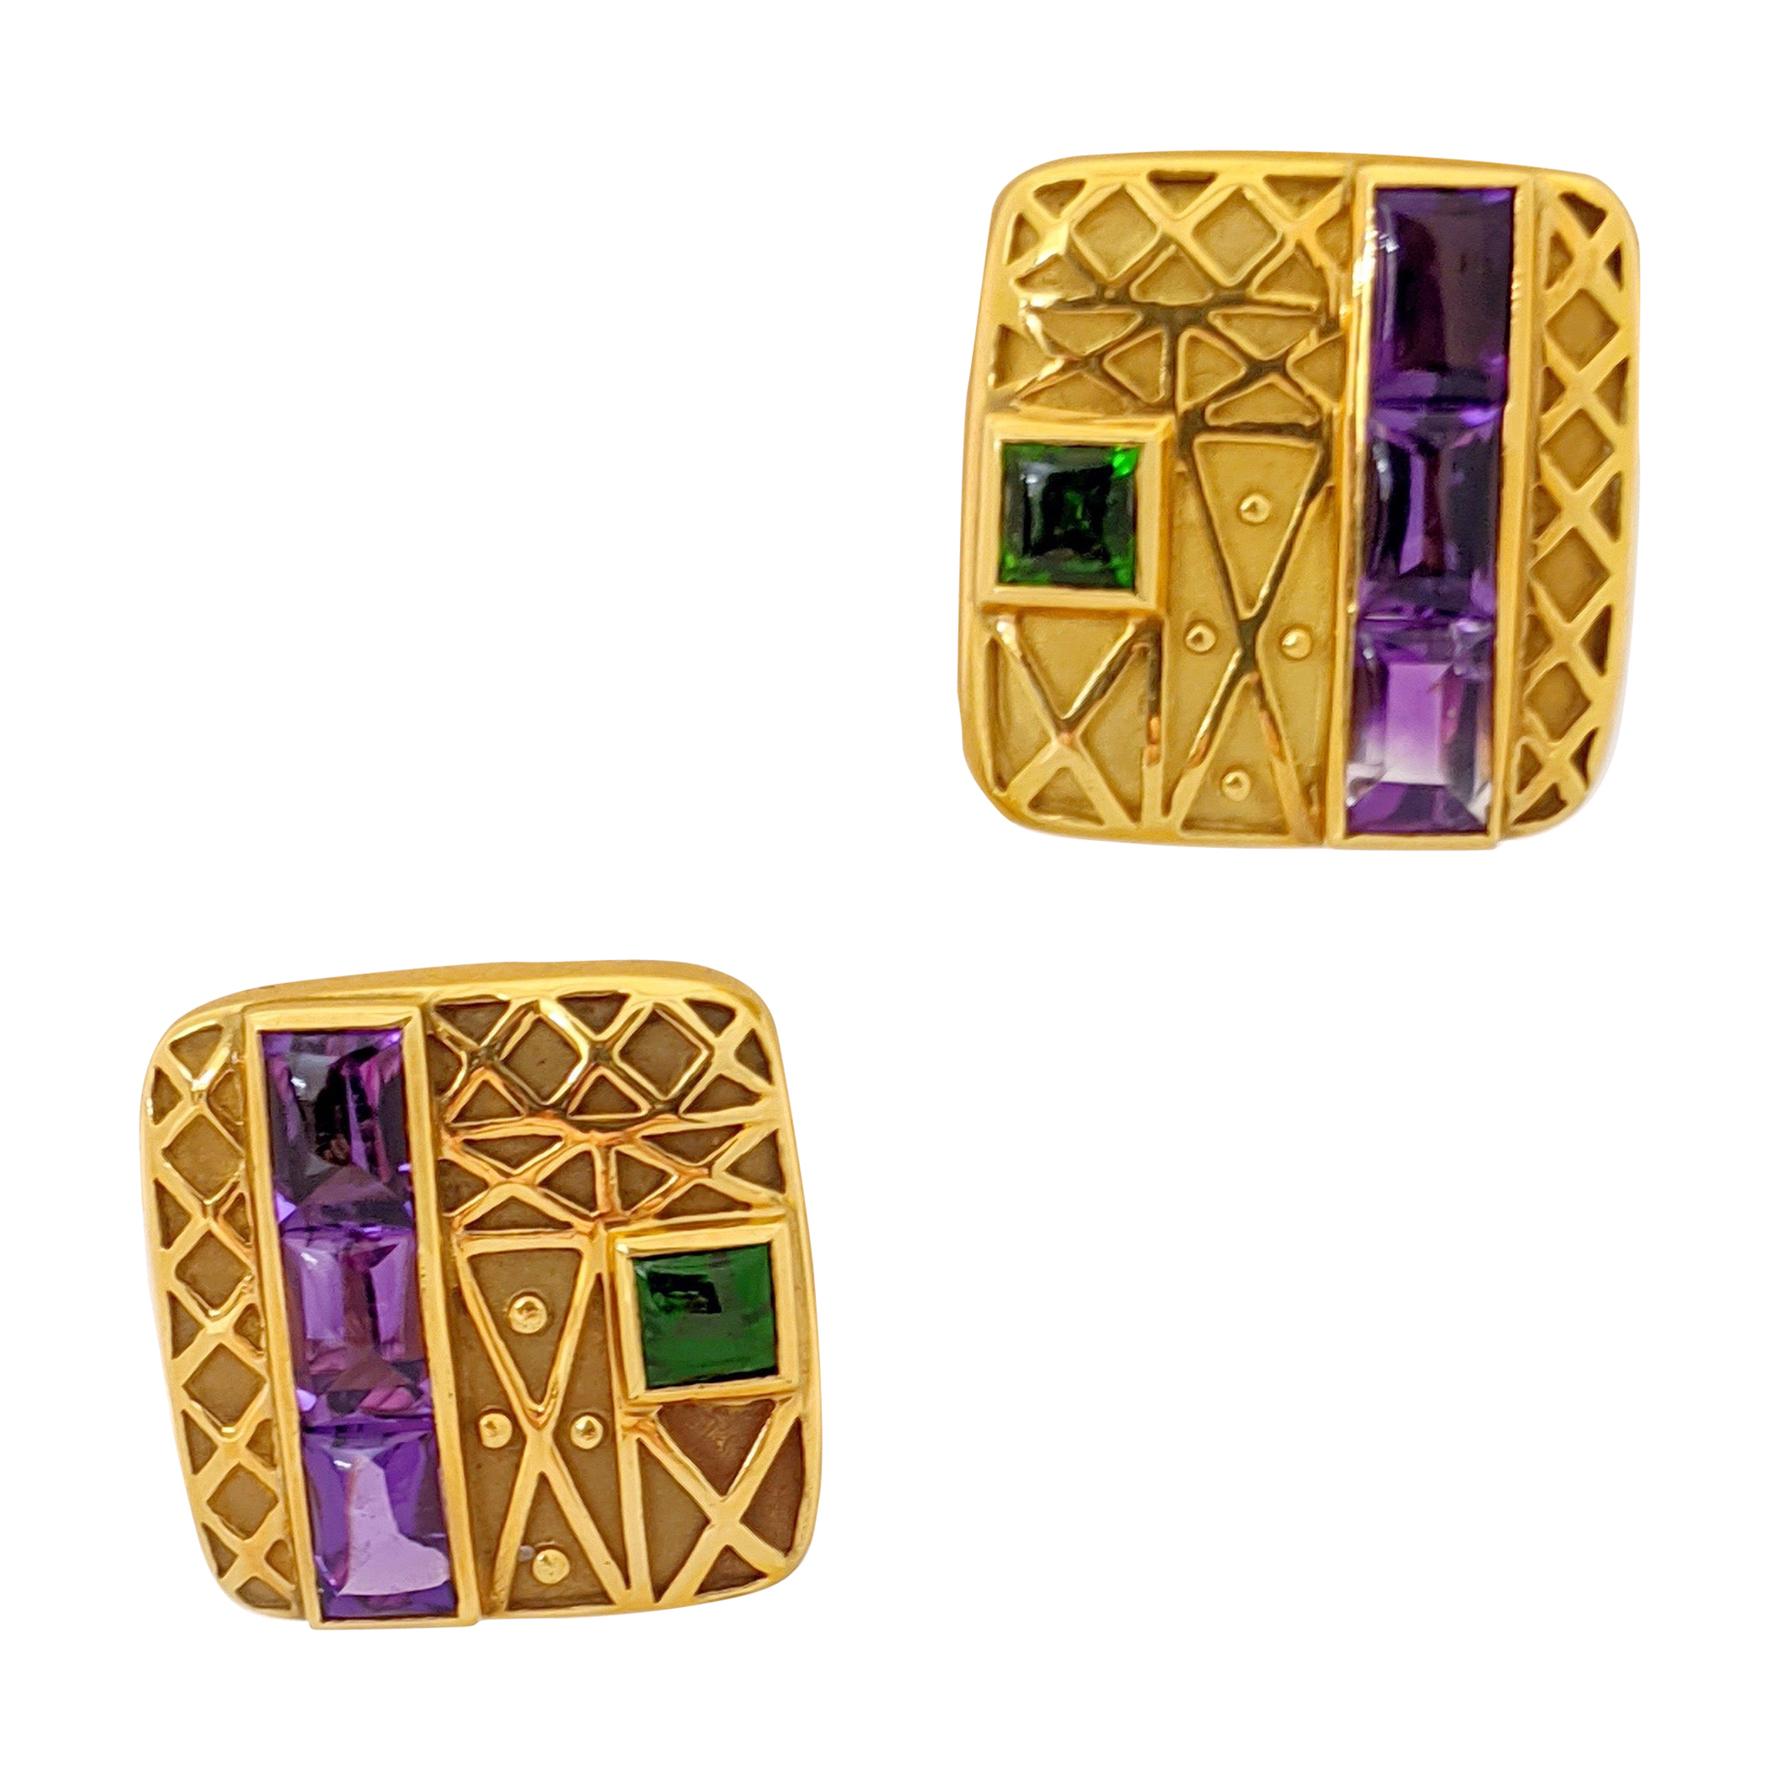 Charles Turi for Cellini 18 Karat Gold Earrings with Amethyst & Chrome Diopside